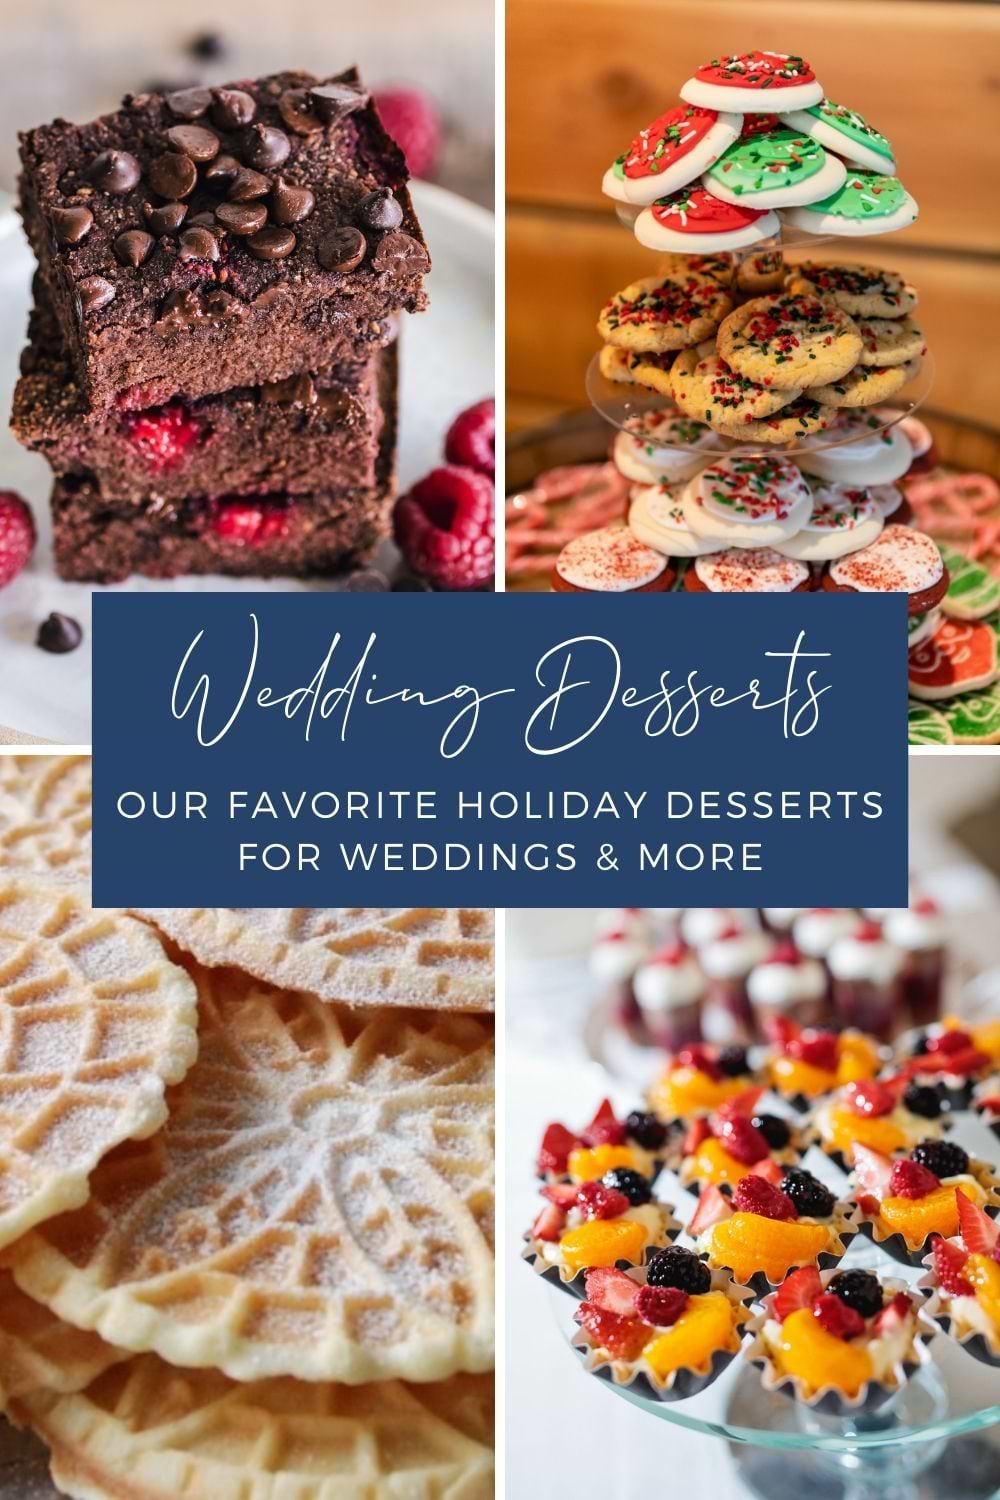 Are you planning a holiday wedding? Embrace the festive nature of the season! Consider offering some of our favorite holiday sweets as your wedding dessert. Today we sit down with one of our wedding professionals to get her first-hand advice on the best holiday desserts to include in your wedding menu. Think gingerbread cookies, decadent brownies, pizelles, and more. Get your holiday wedding dessert inspiration here!